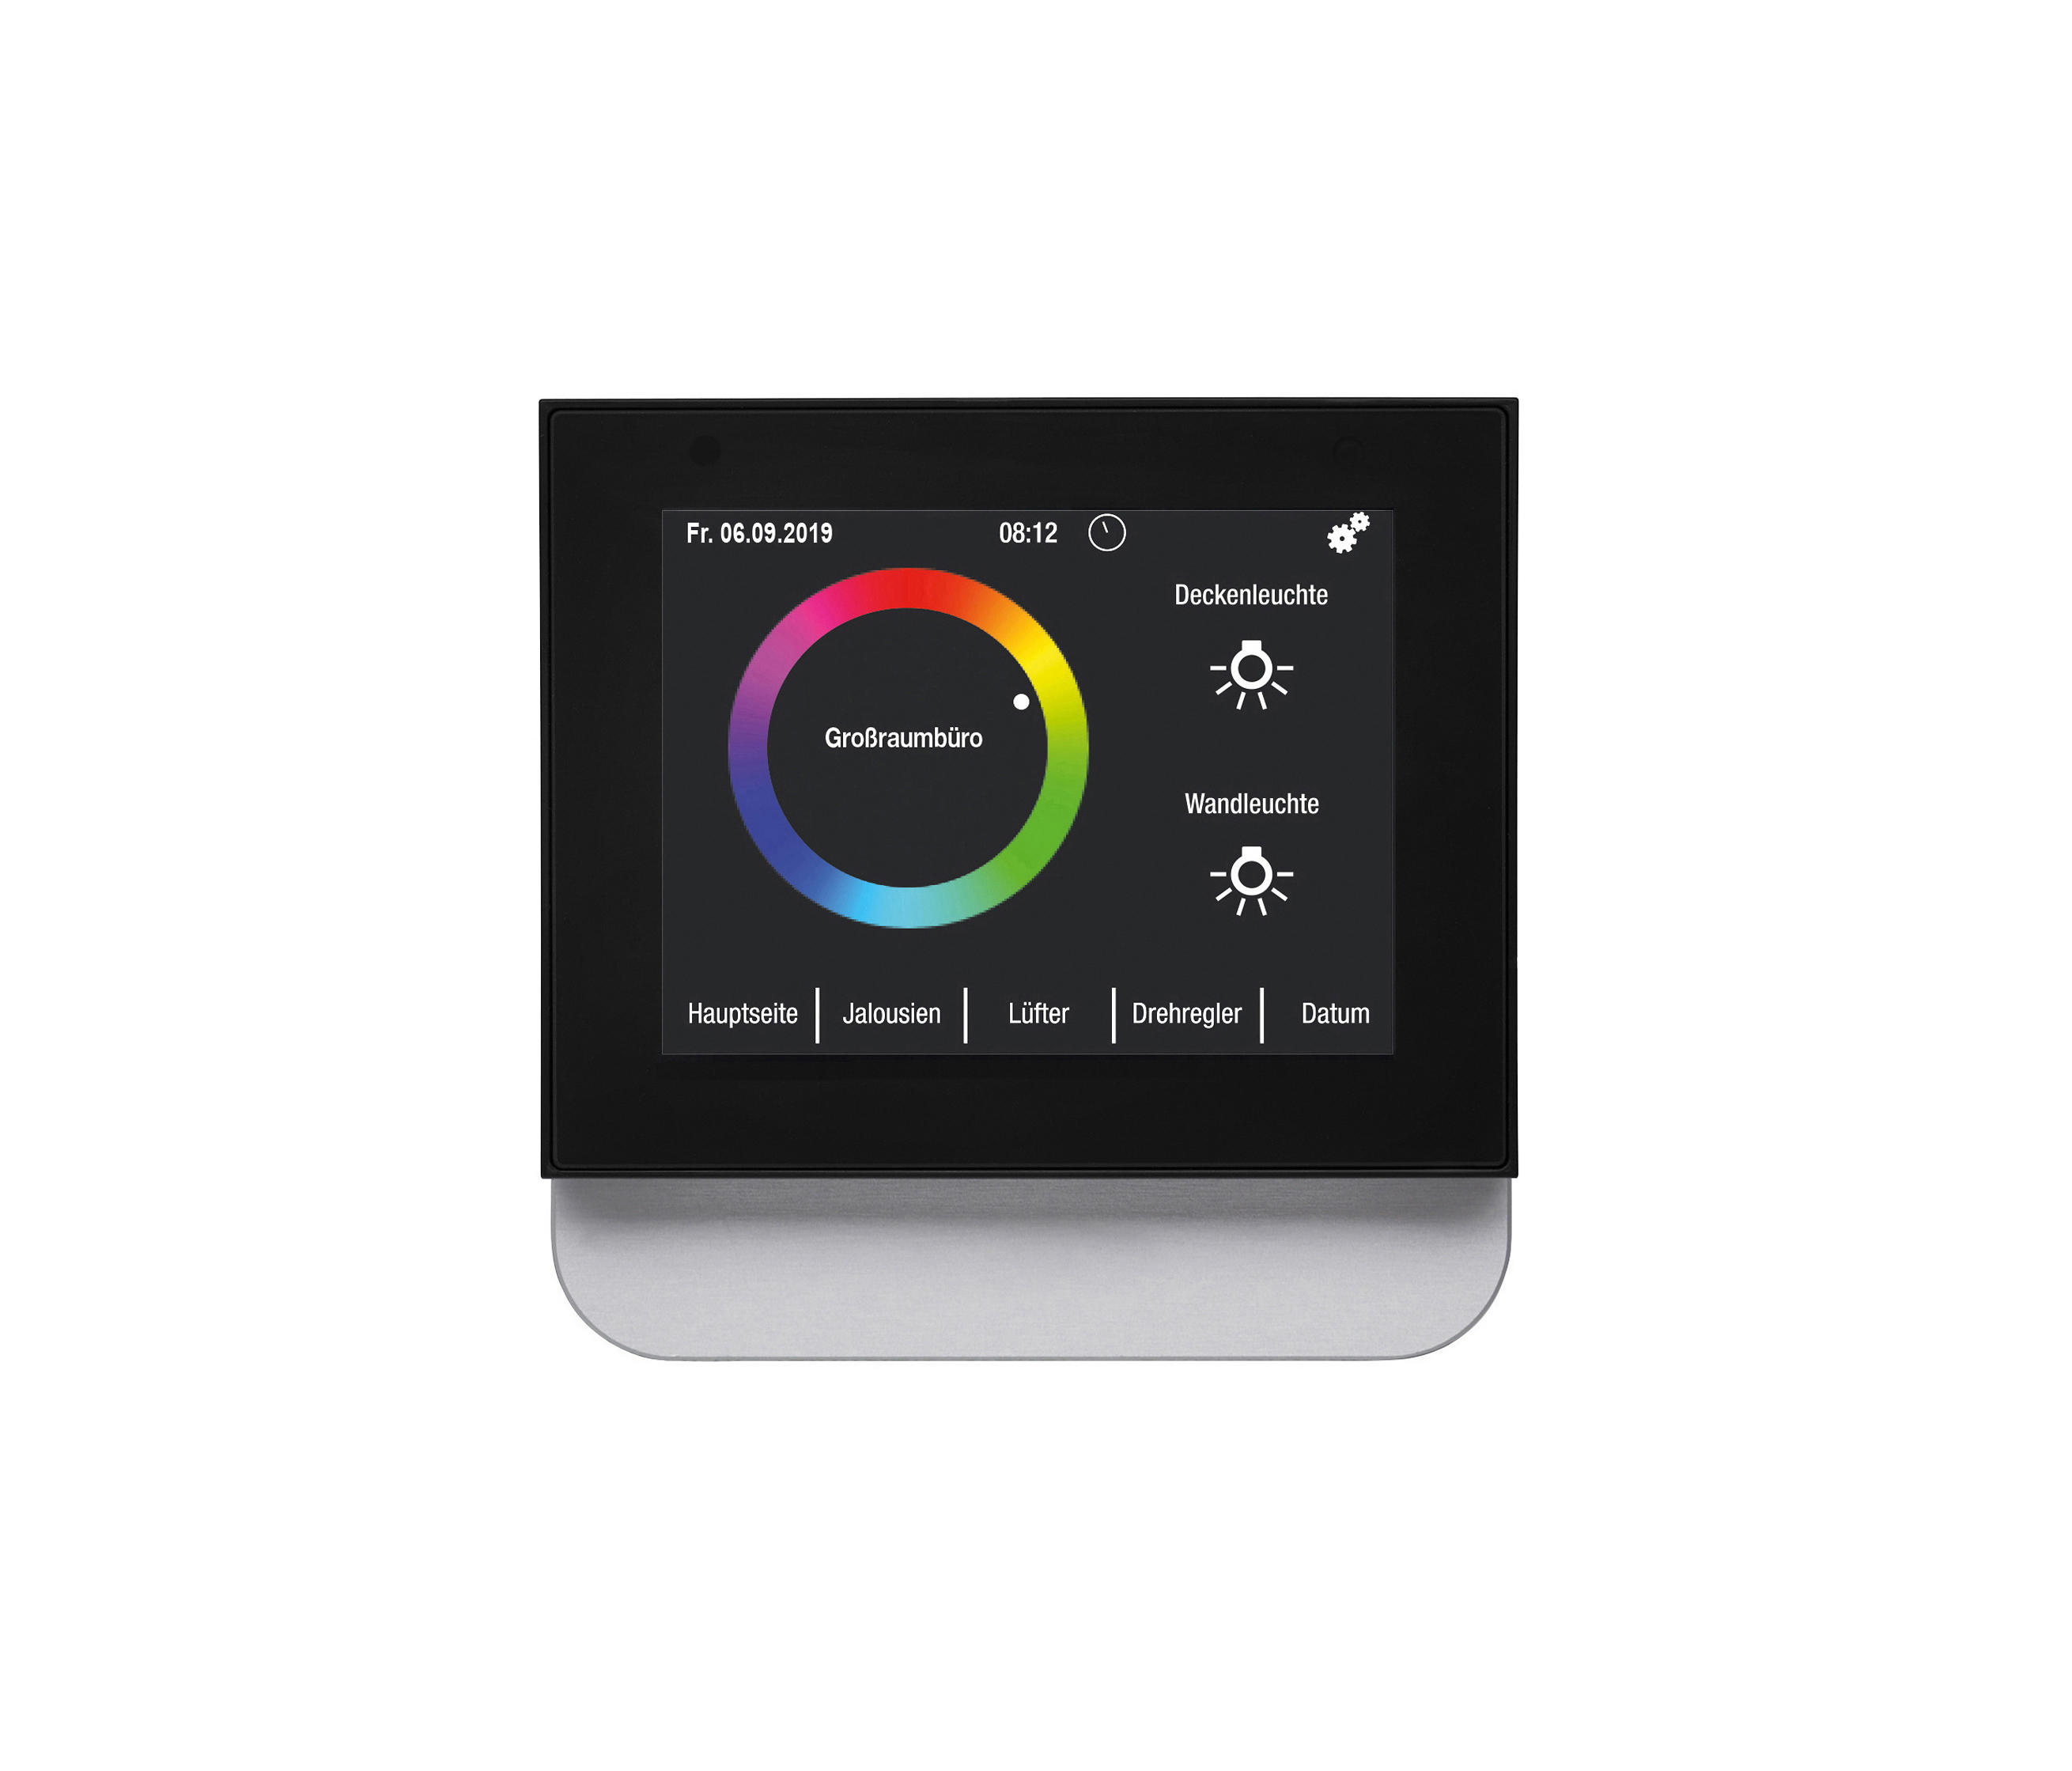 https://image.architonic.com/pro2-3/20215891/knx-touch-control-sp-silber-display-rgb-frontal-001-pro-b-arcit18.jpg